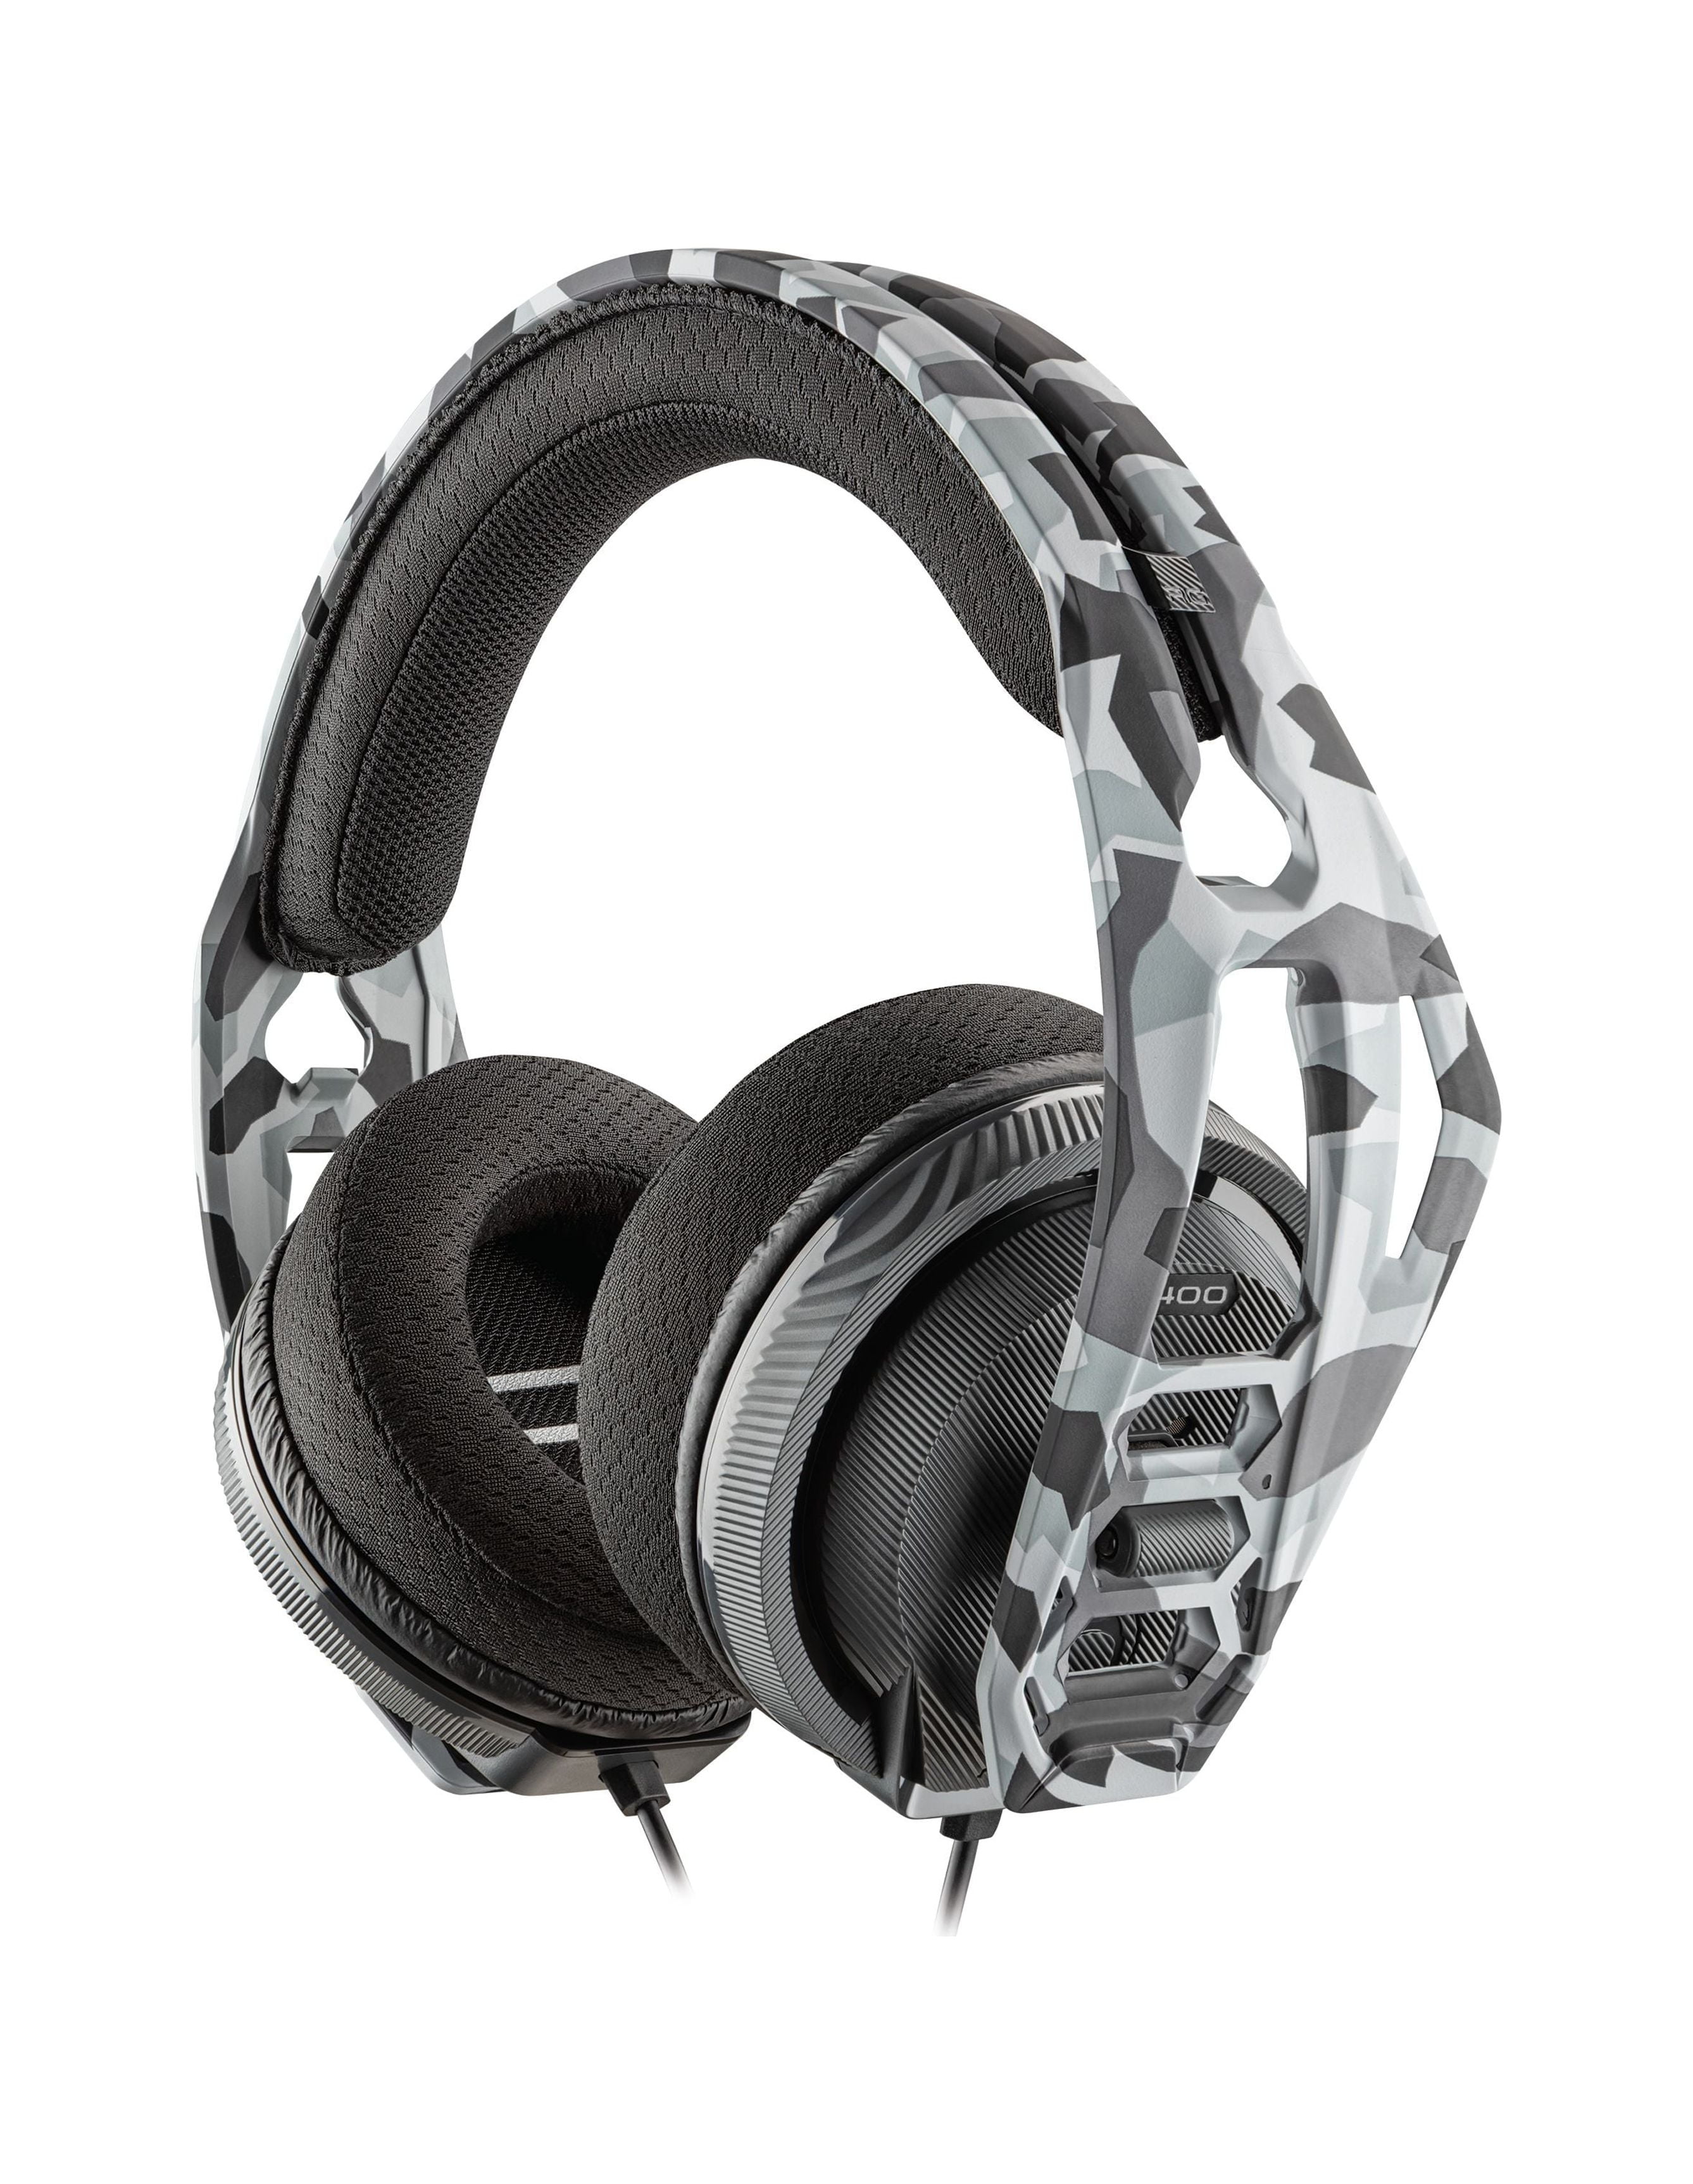 Camo RIG Headset Mobile, PC PlayStation, for HS PlayStation Gaming 400 &